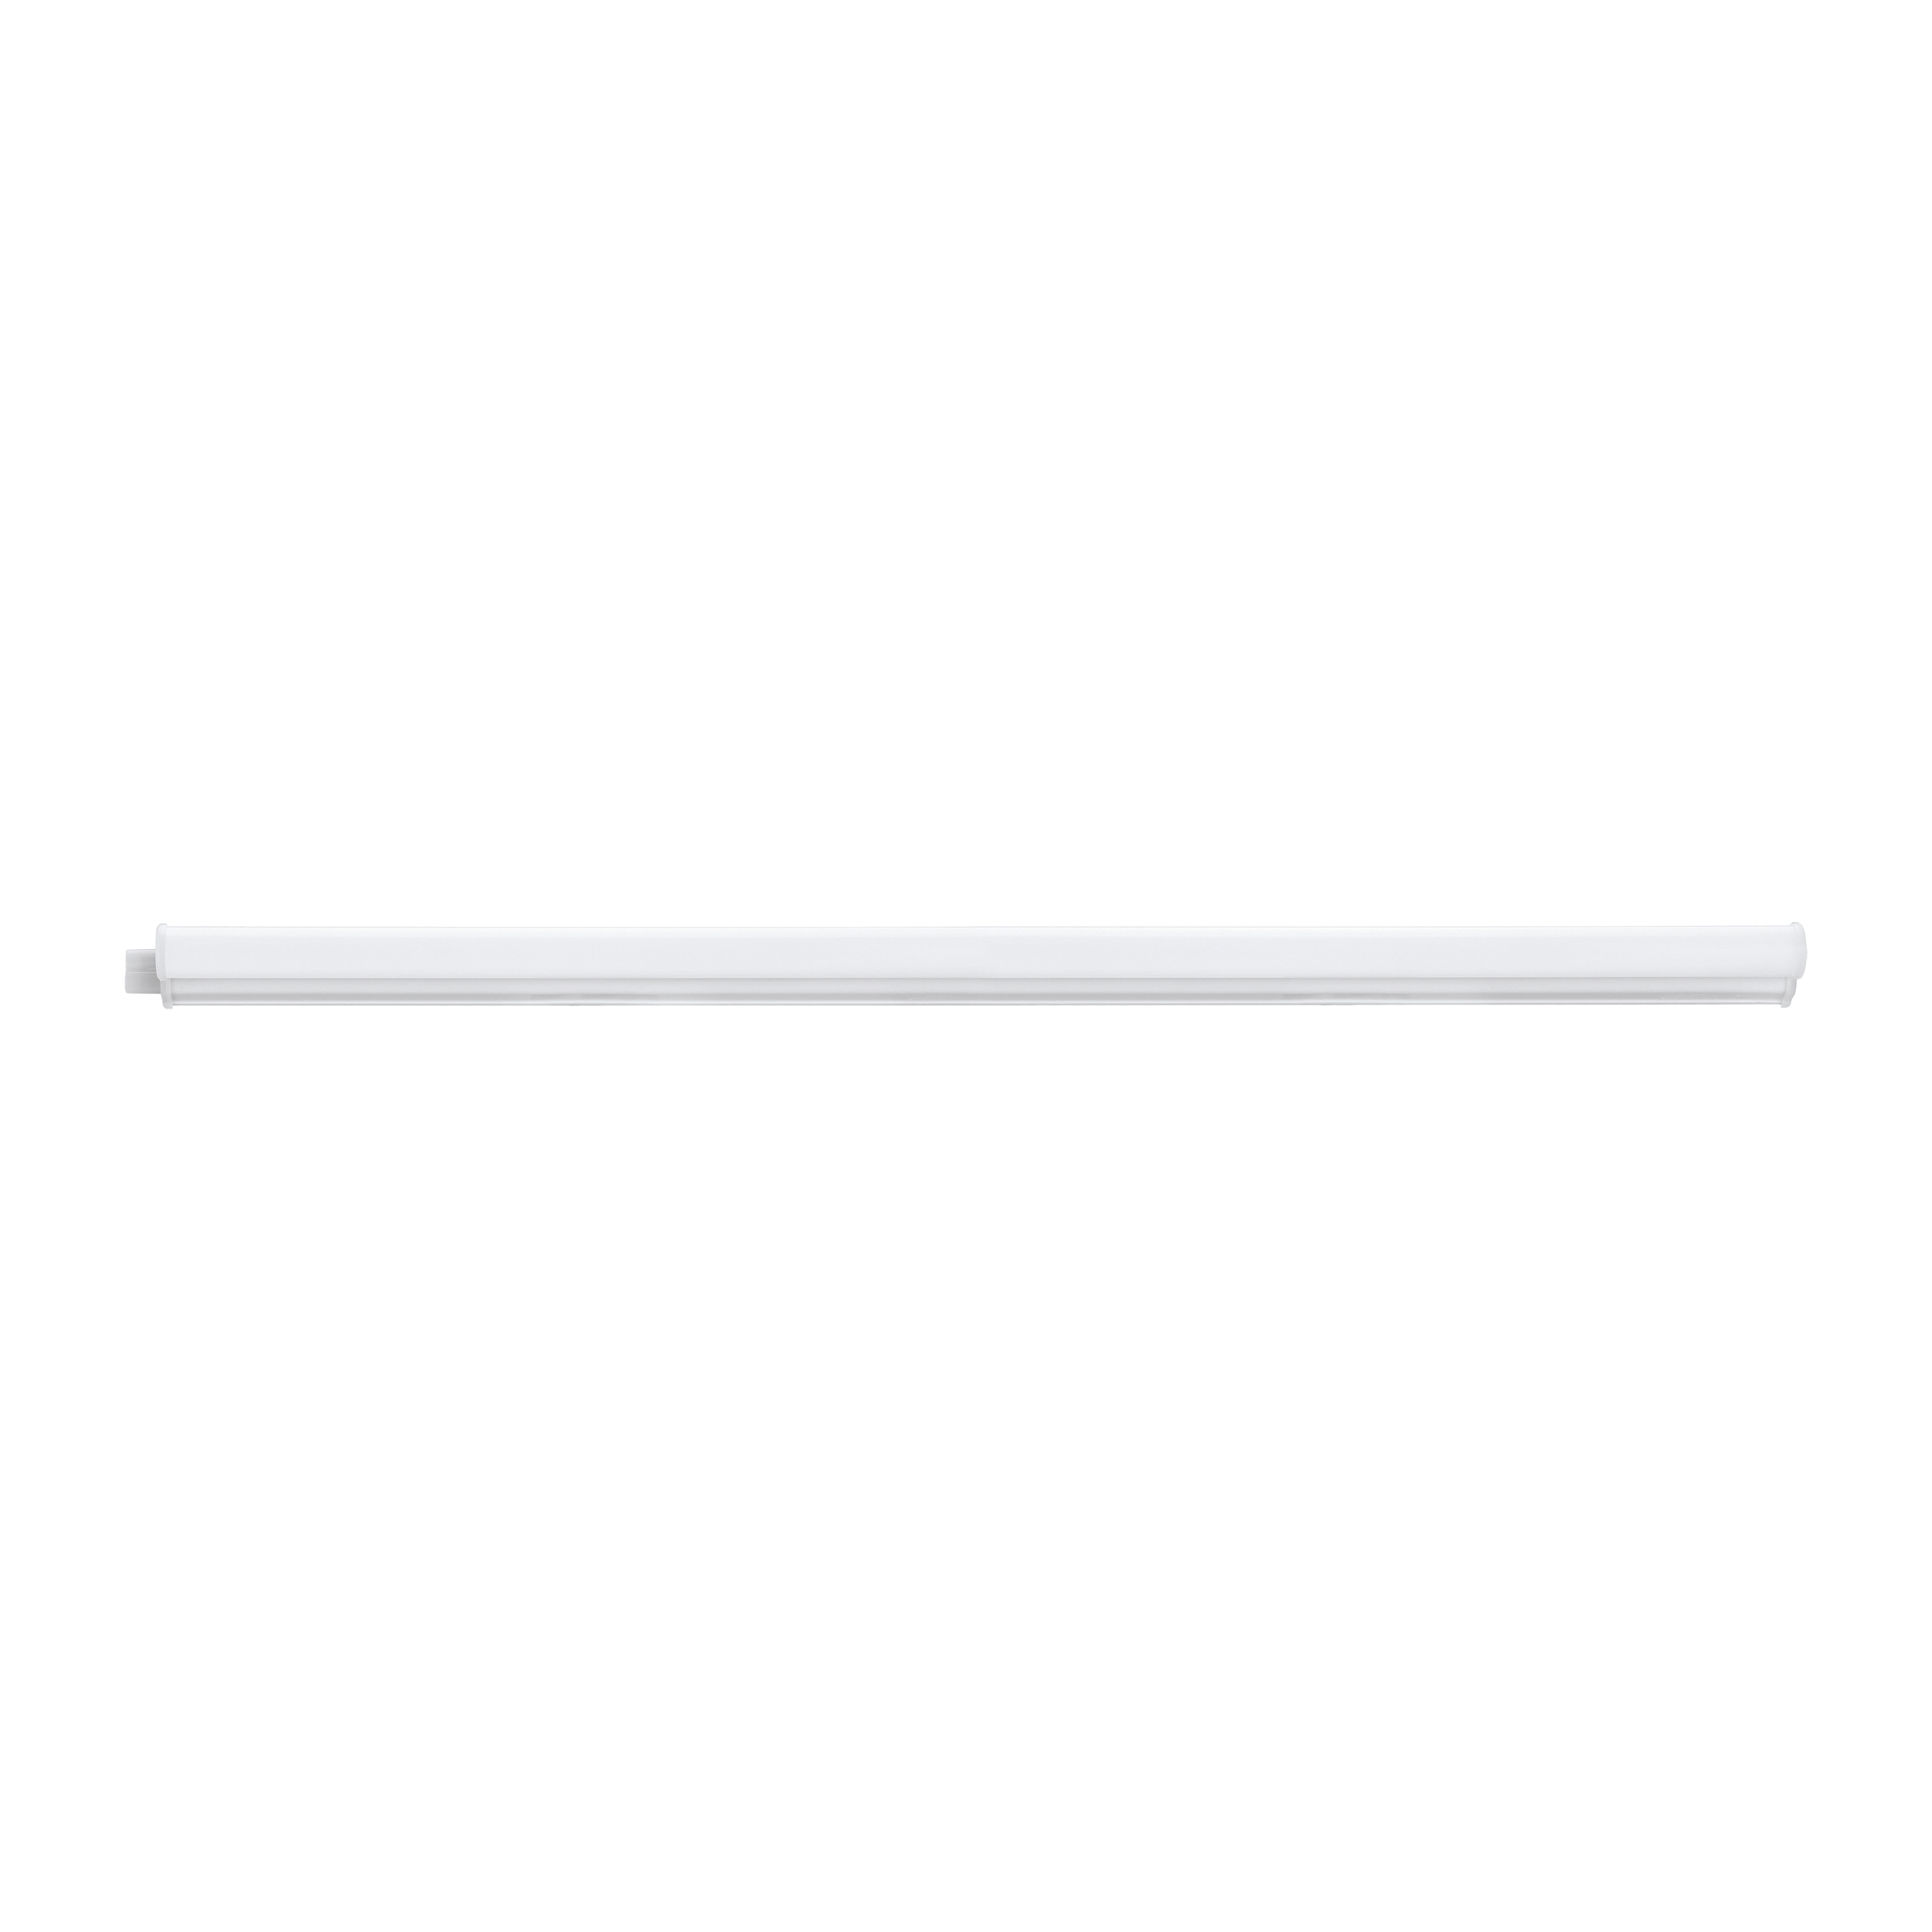 Dundry wall / ceiling lamp 57.0x2.5 EGLO 97572